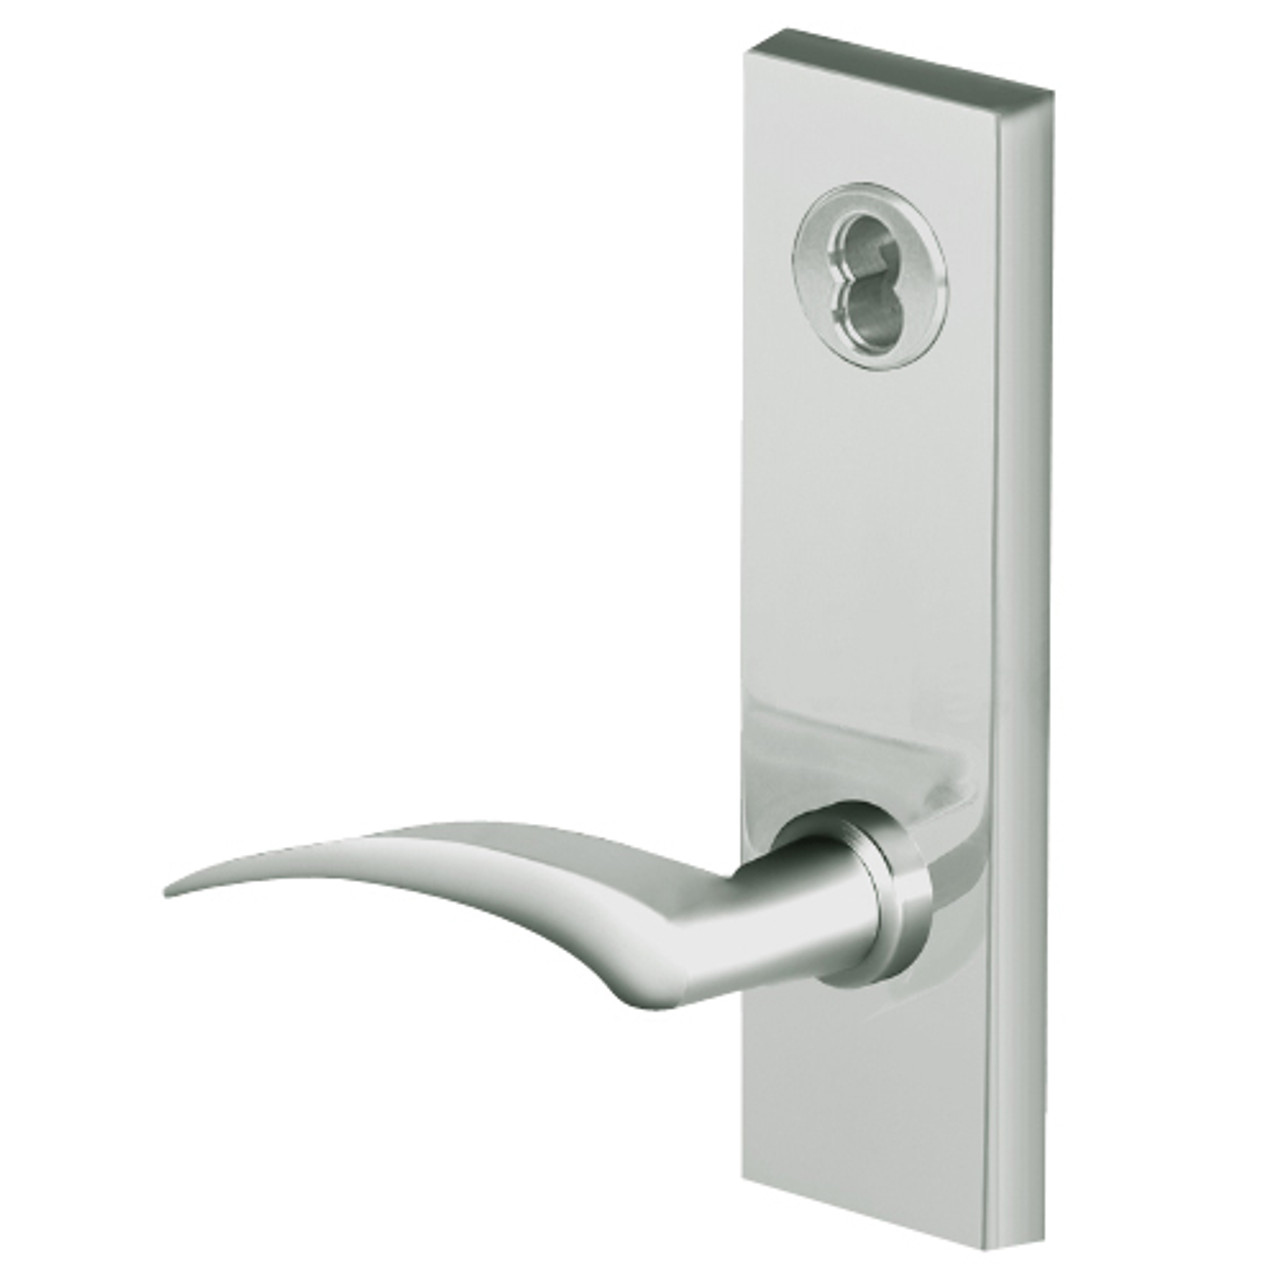 45H7HJ17RM619 Best 40H Series Hotel with Deadbolt Heavy Duty Mortise Lever Lock with Gull Wing RH in Satin Nickel